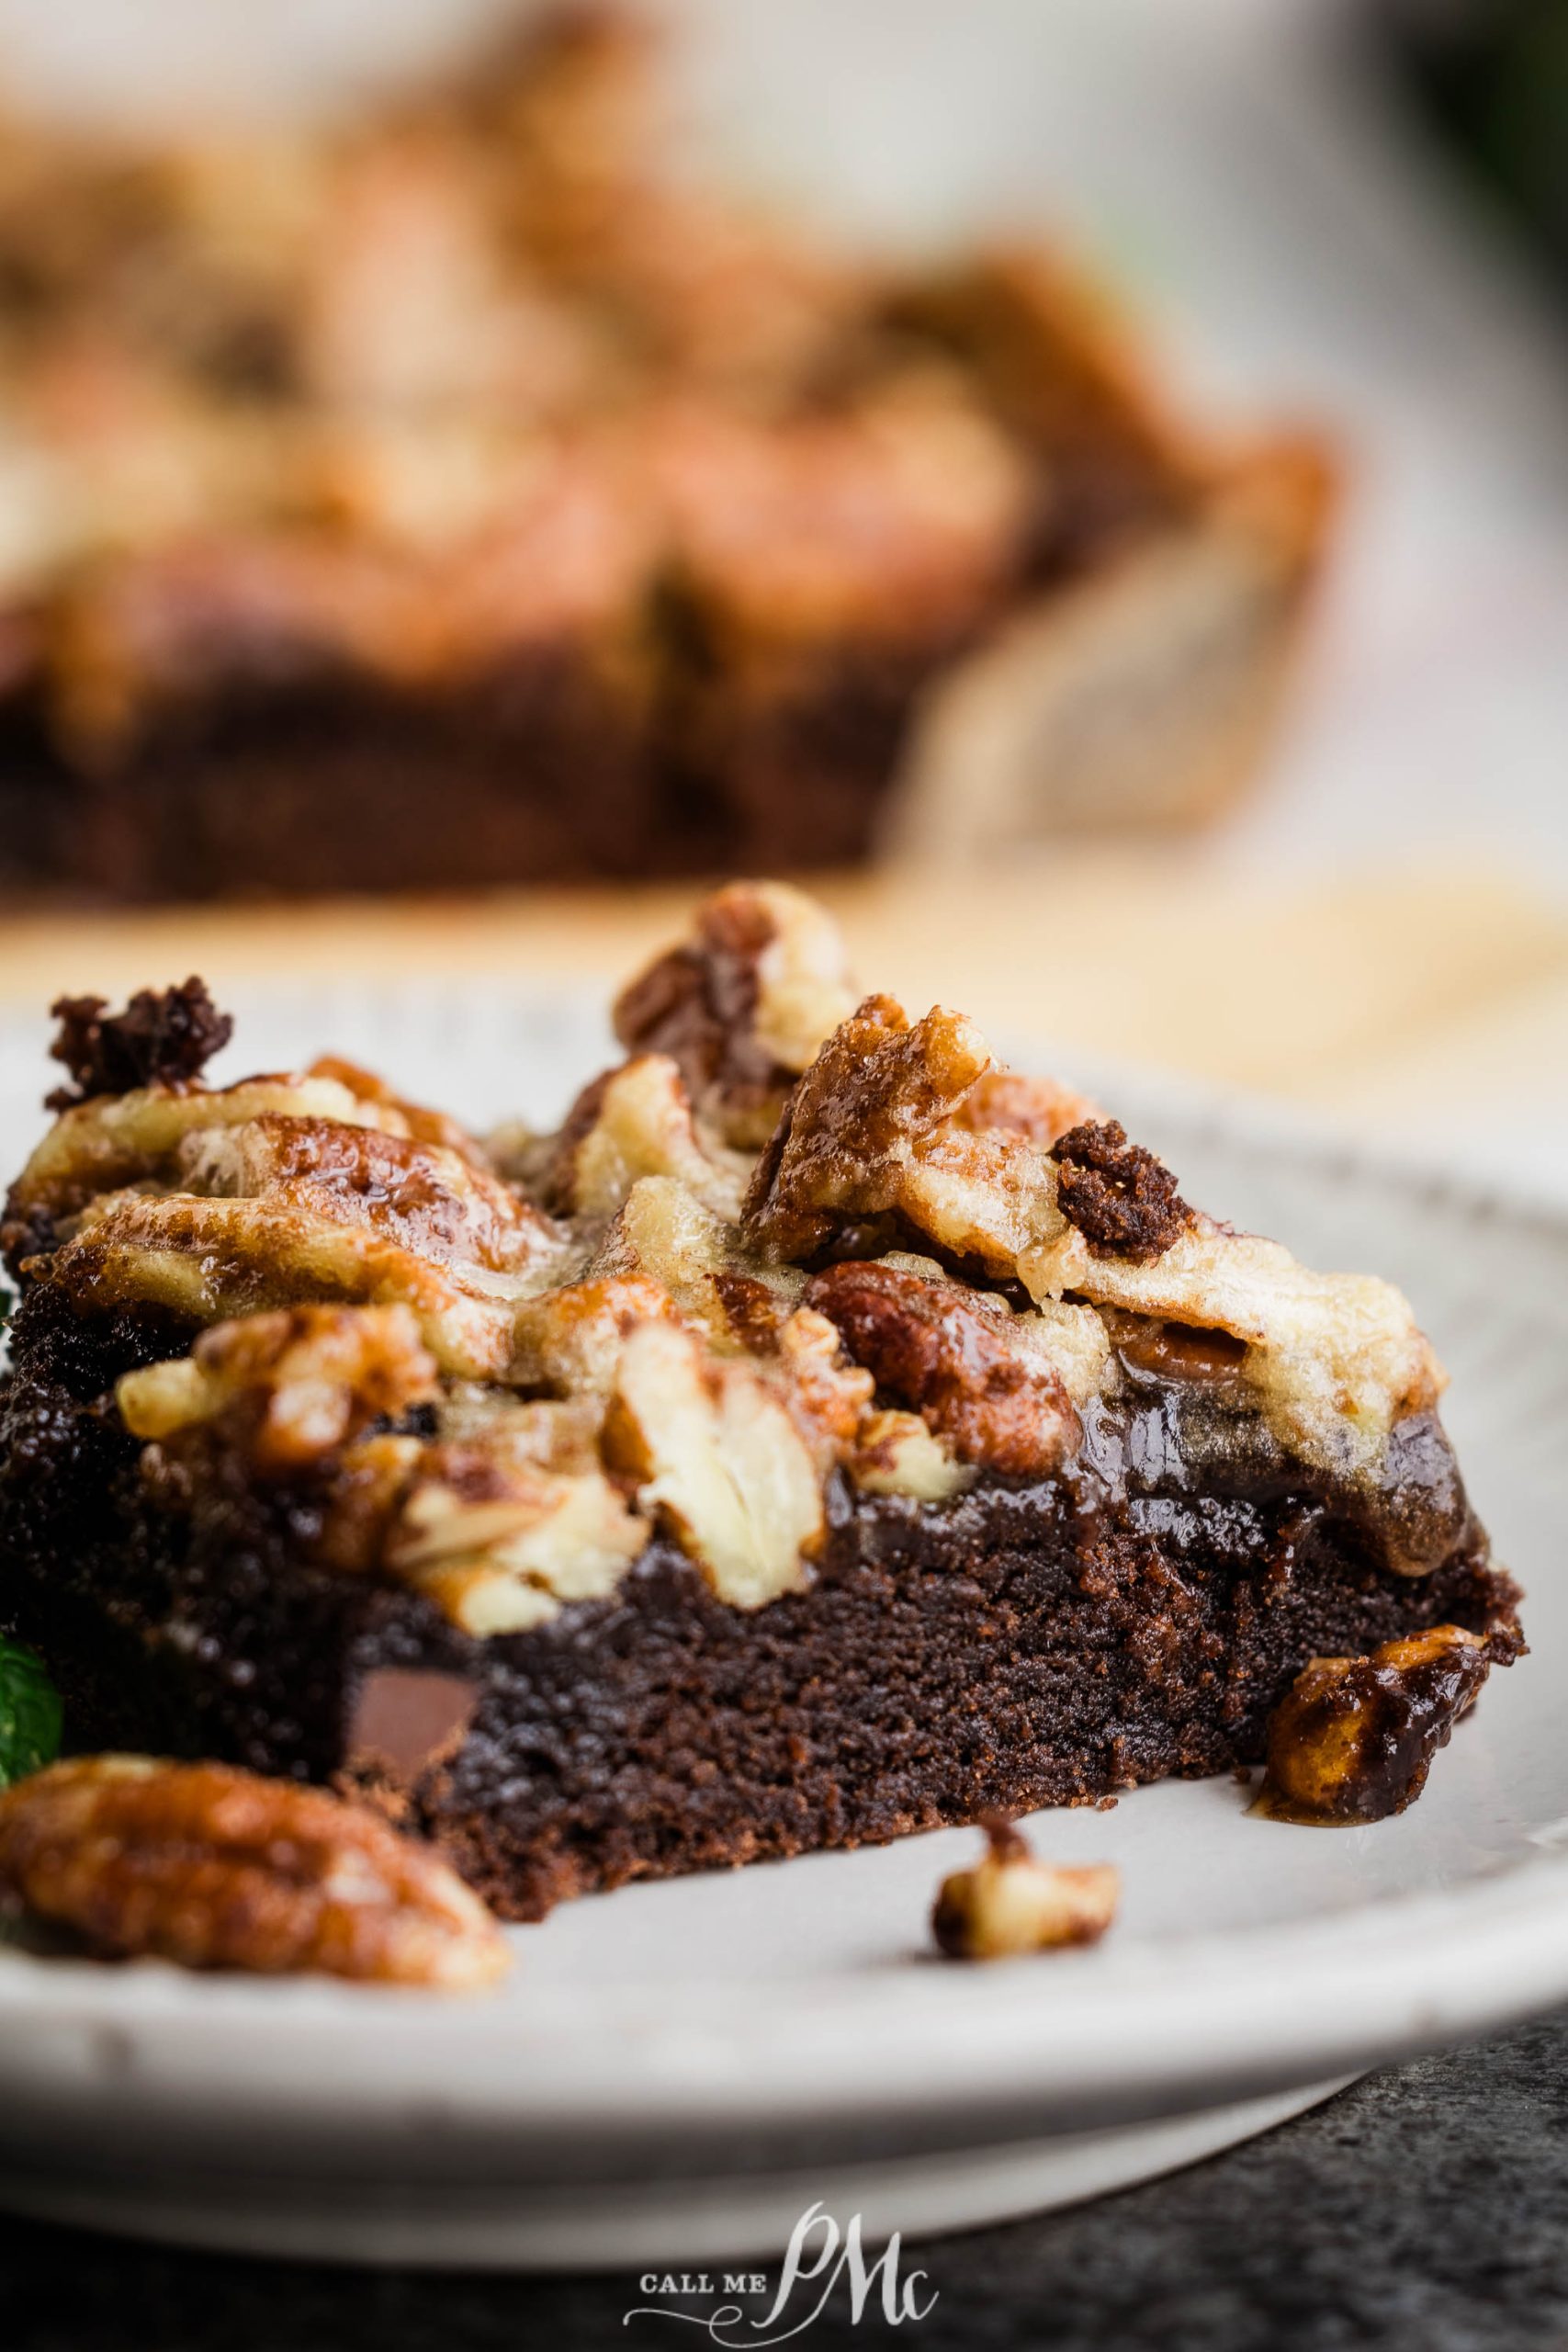 A slice of chocolate brownie with pecans on a plate.